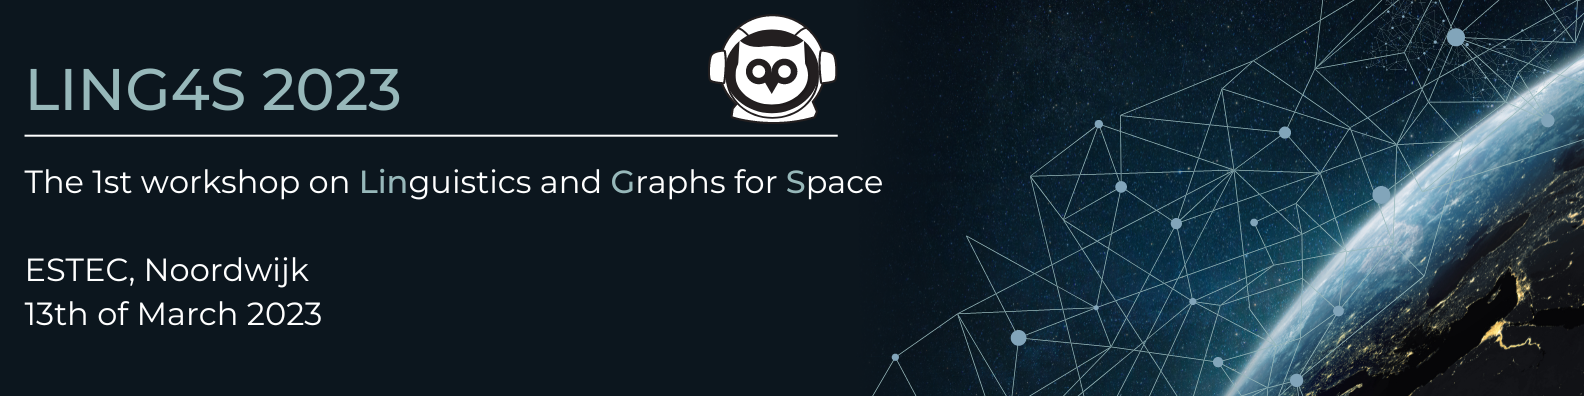 LING4S: The 1st Workshop on Linguistics and Graphs for Space!